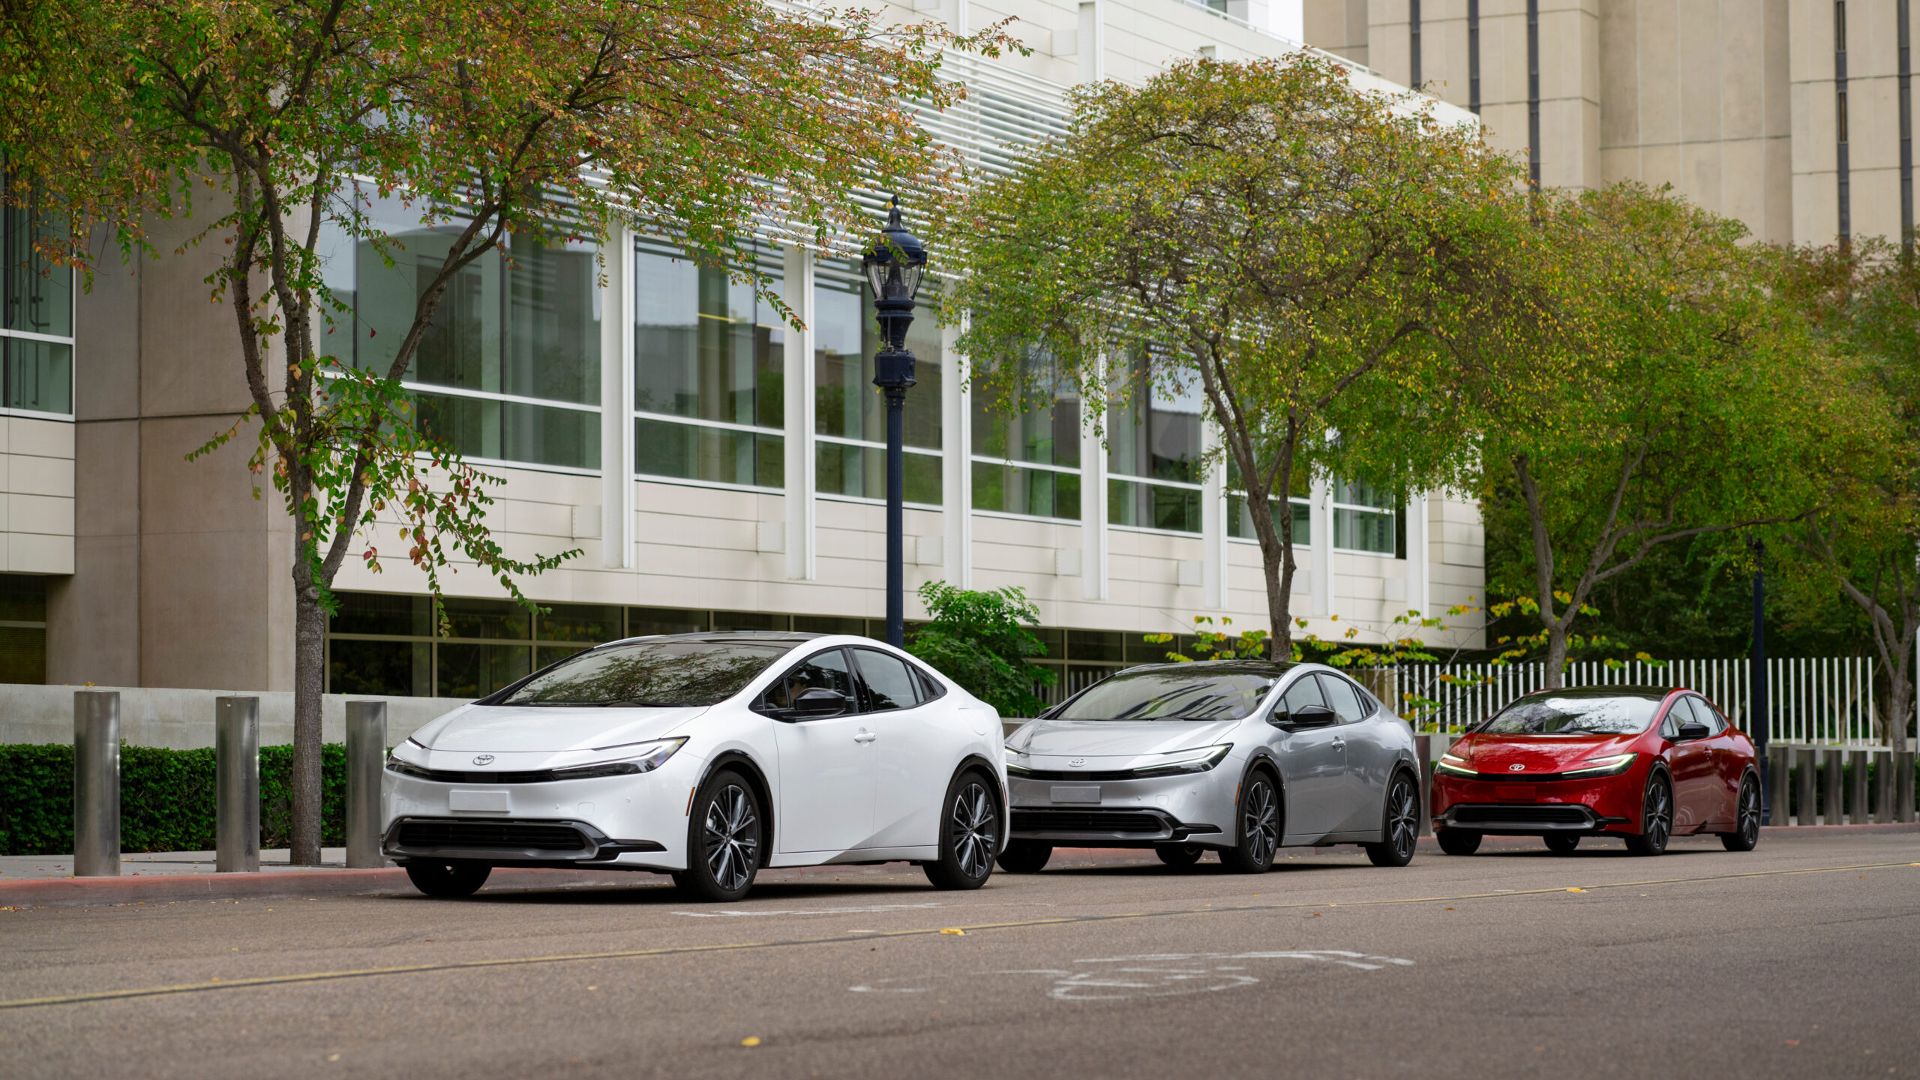  Three Toyota Prius vehicles parked in a row on a city street